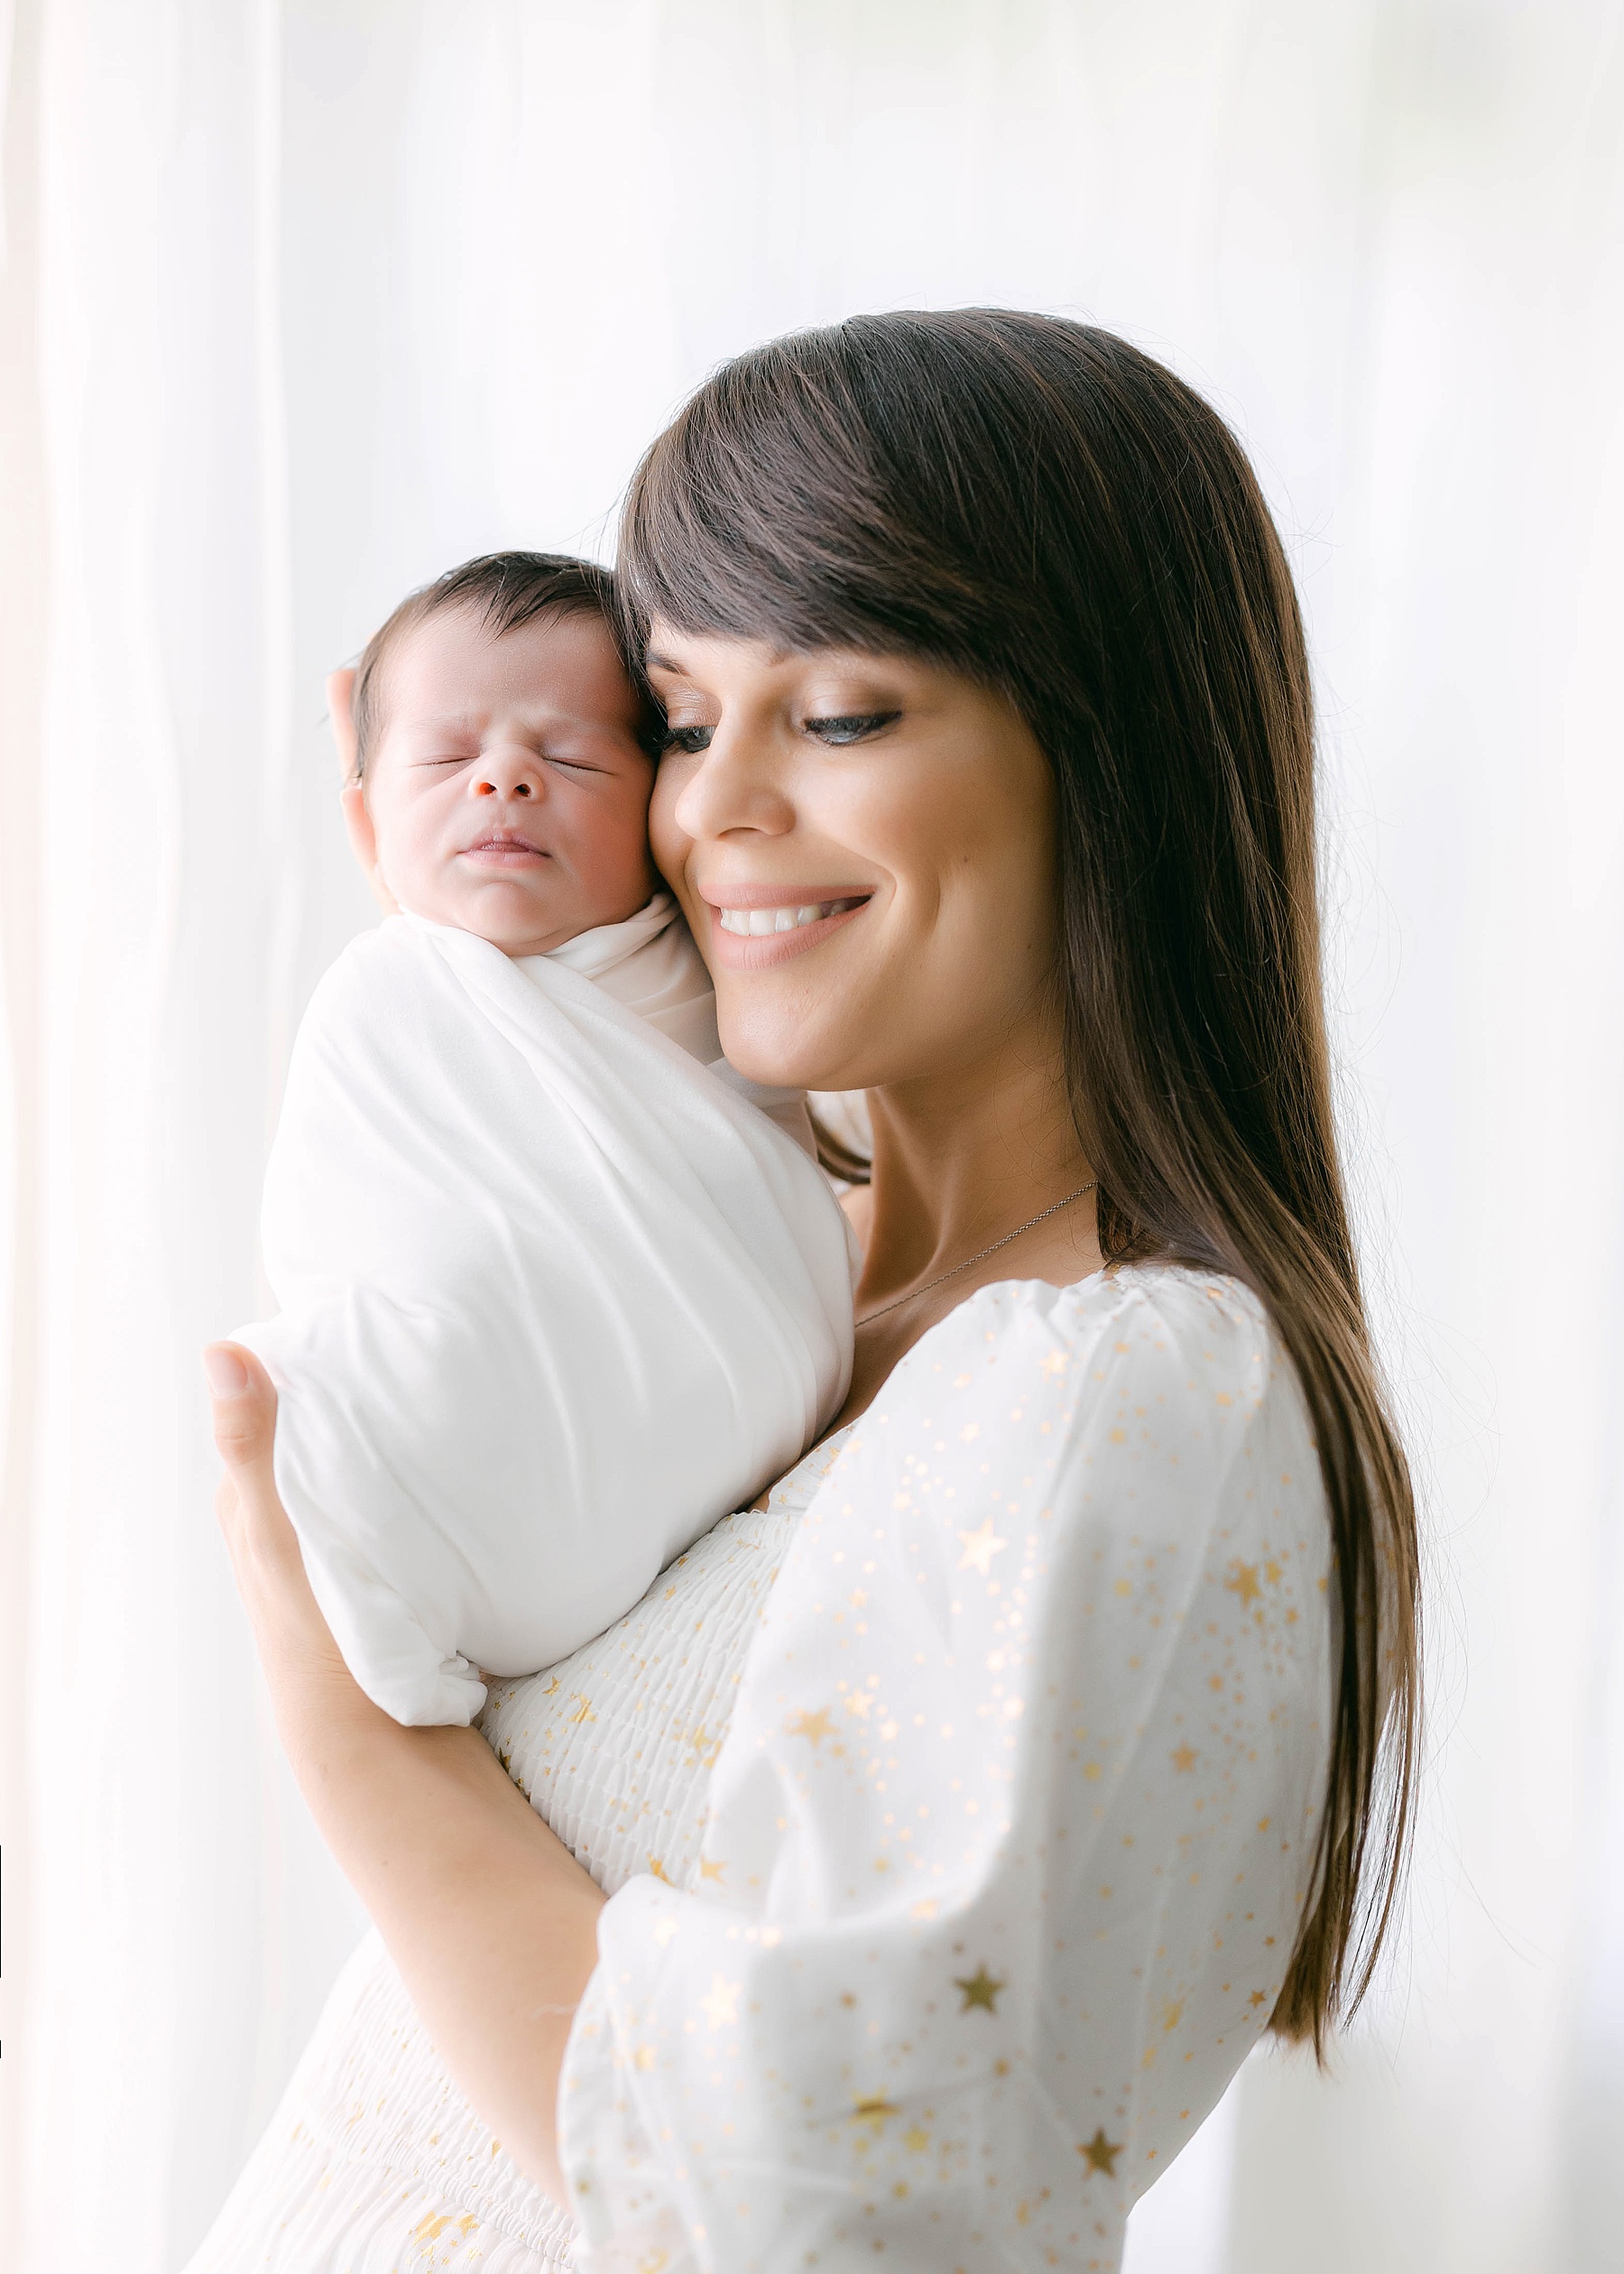 woman holding newborn baby in front of window wearing white dress with gold stars